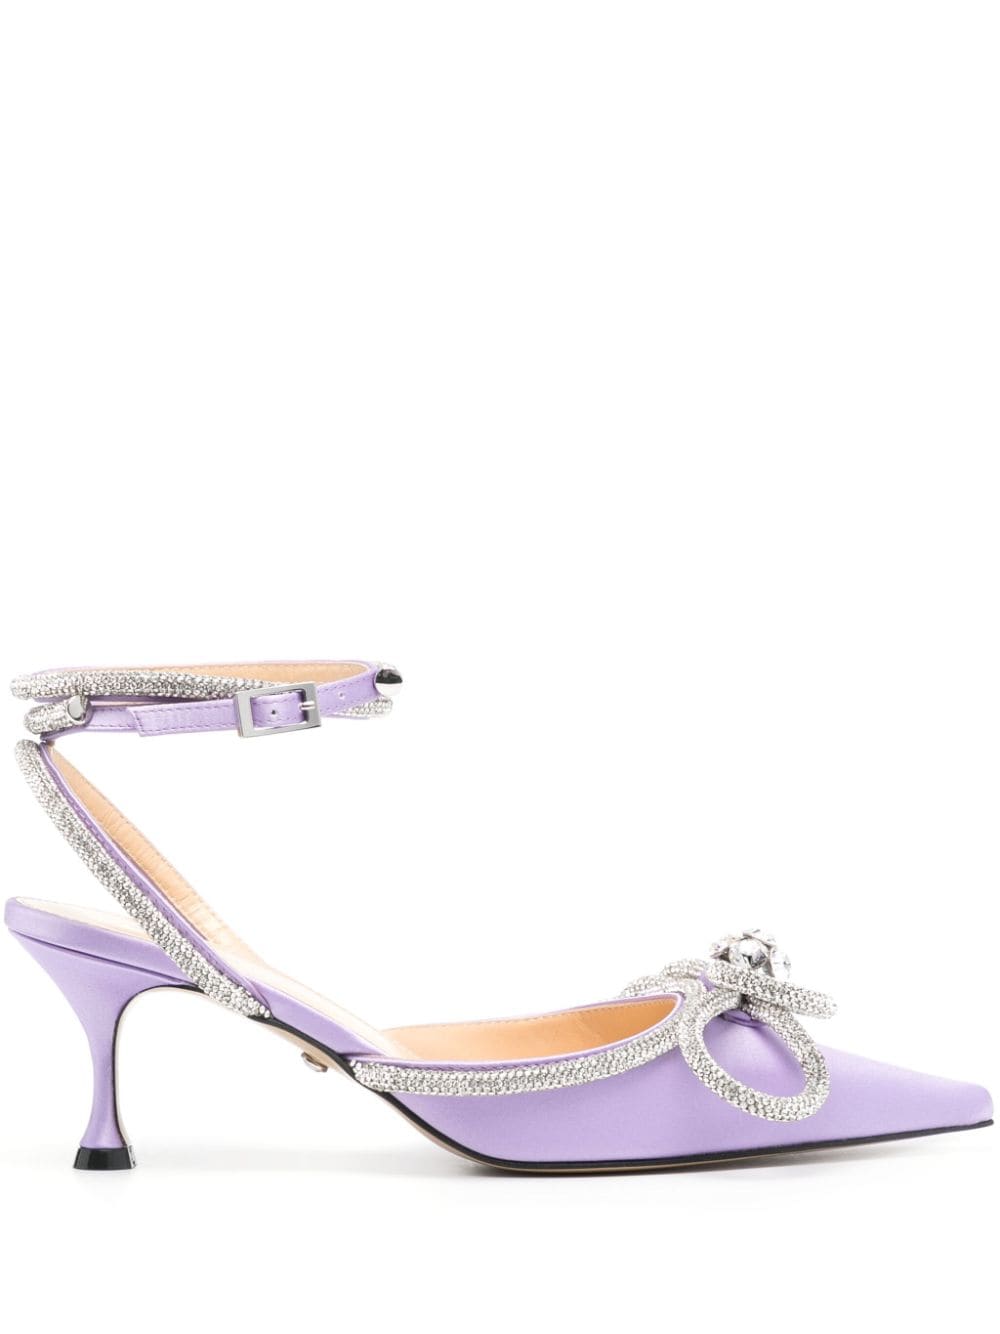 Mach & Mach Double Bow 65mm Crystal Pumps In Purple